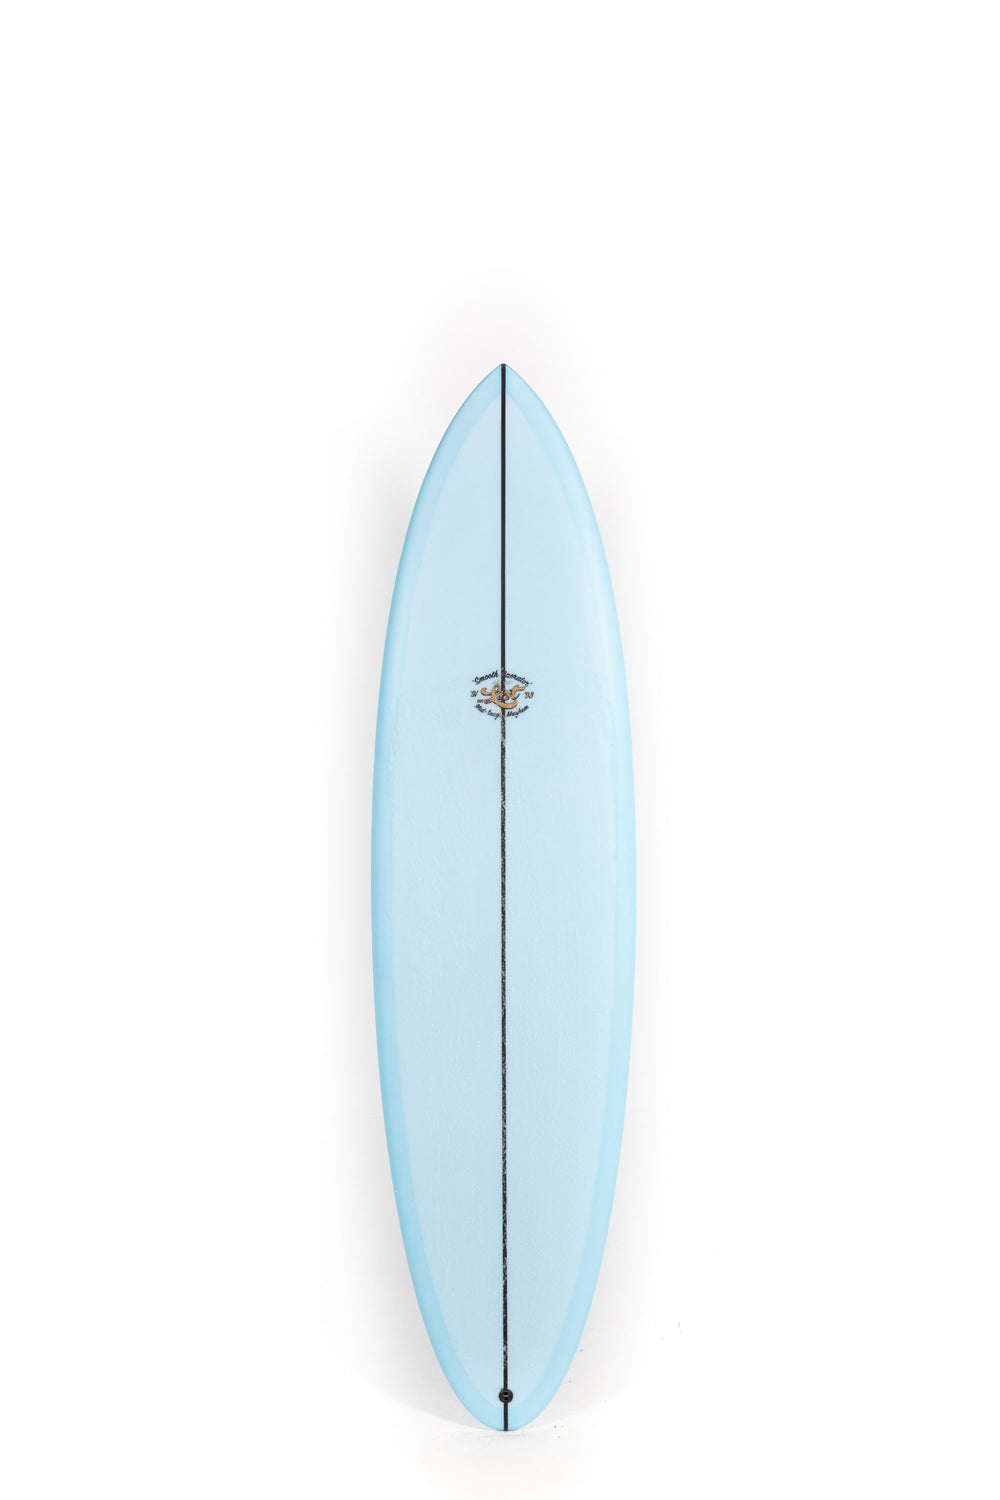 Lost Surfboards - SMOOTH OPERATOR by Matt Biolos - 7’0” x 21,25 x 2,82 - 46,25L - MH19474